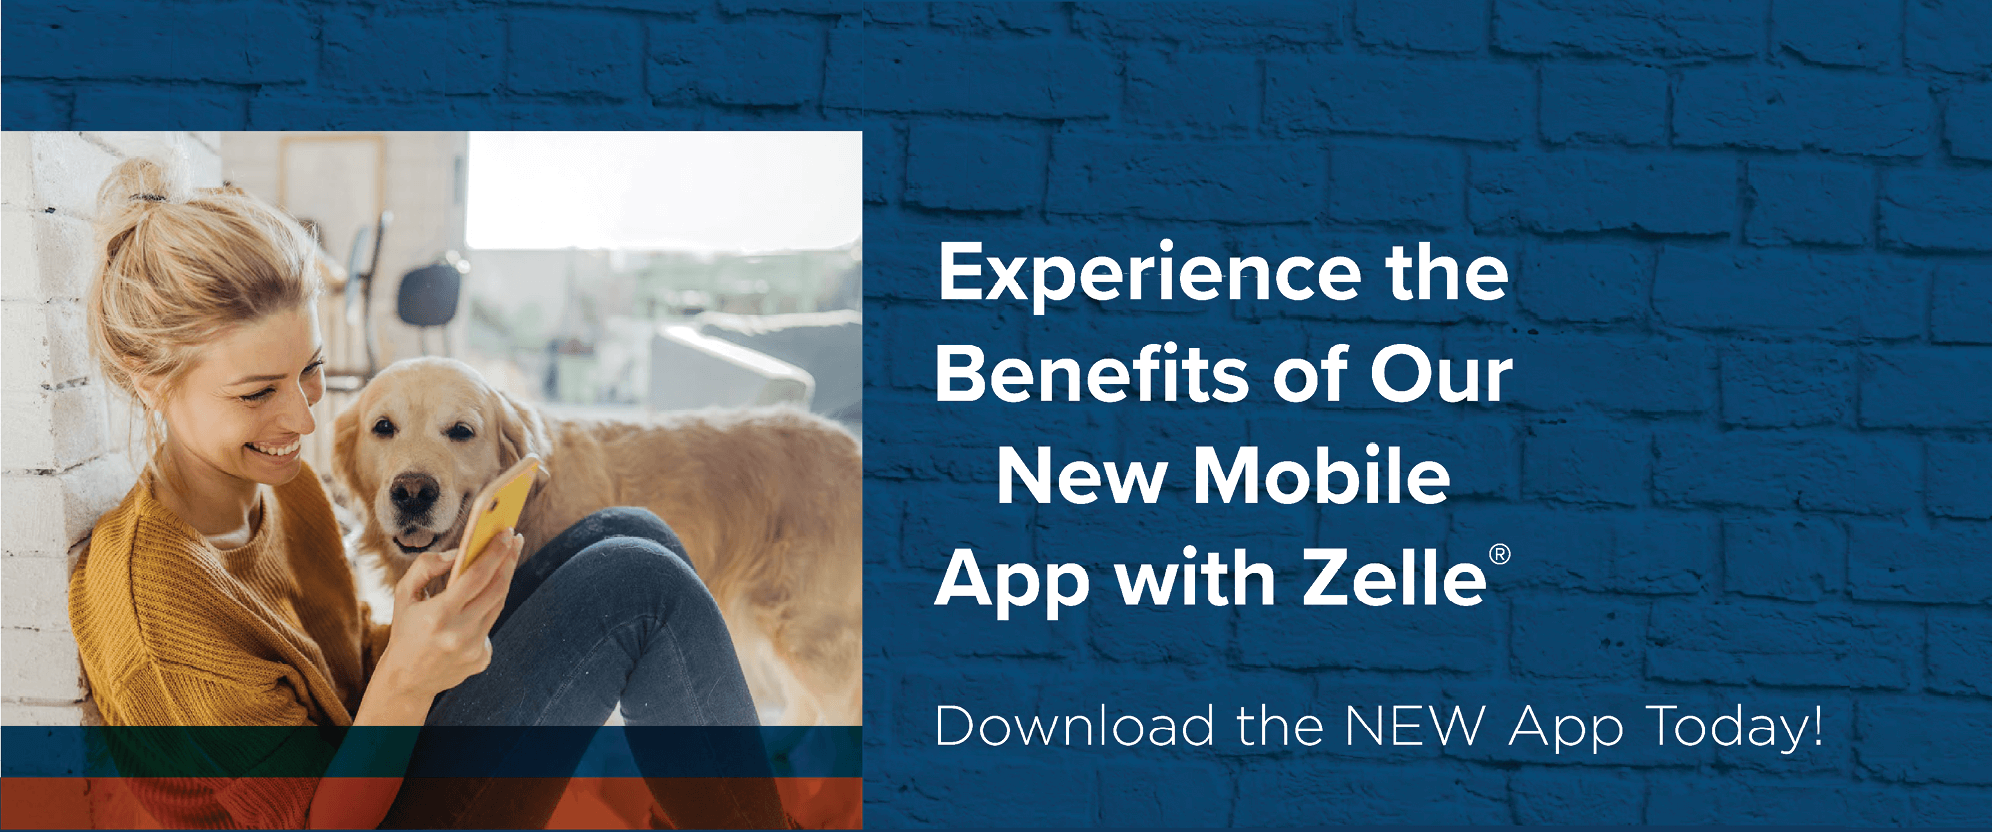 Experience the benefits of our new mobile app with Zelle. Download the new app today!